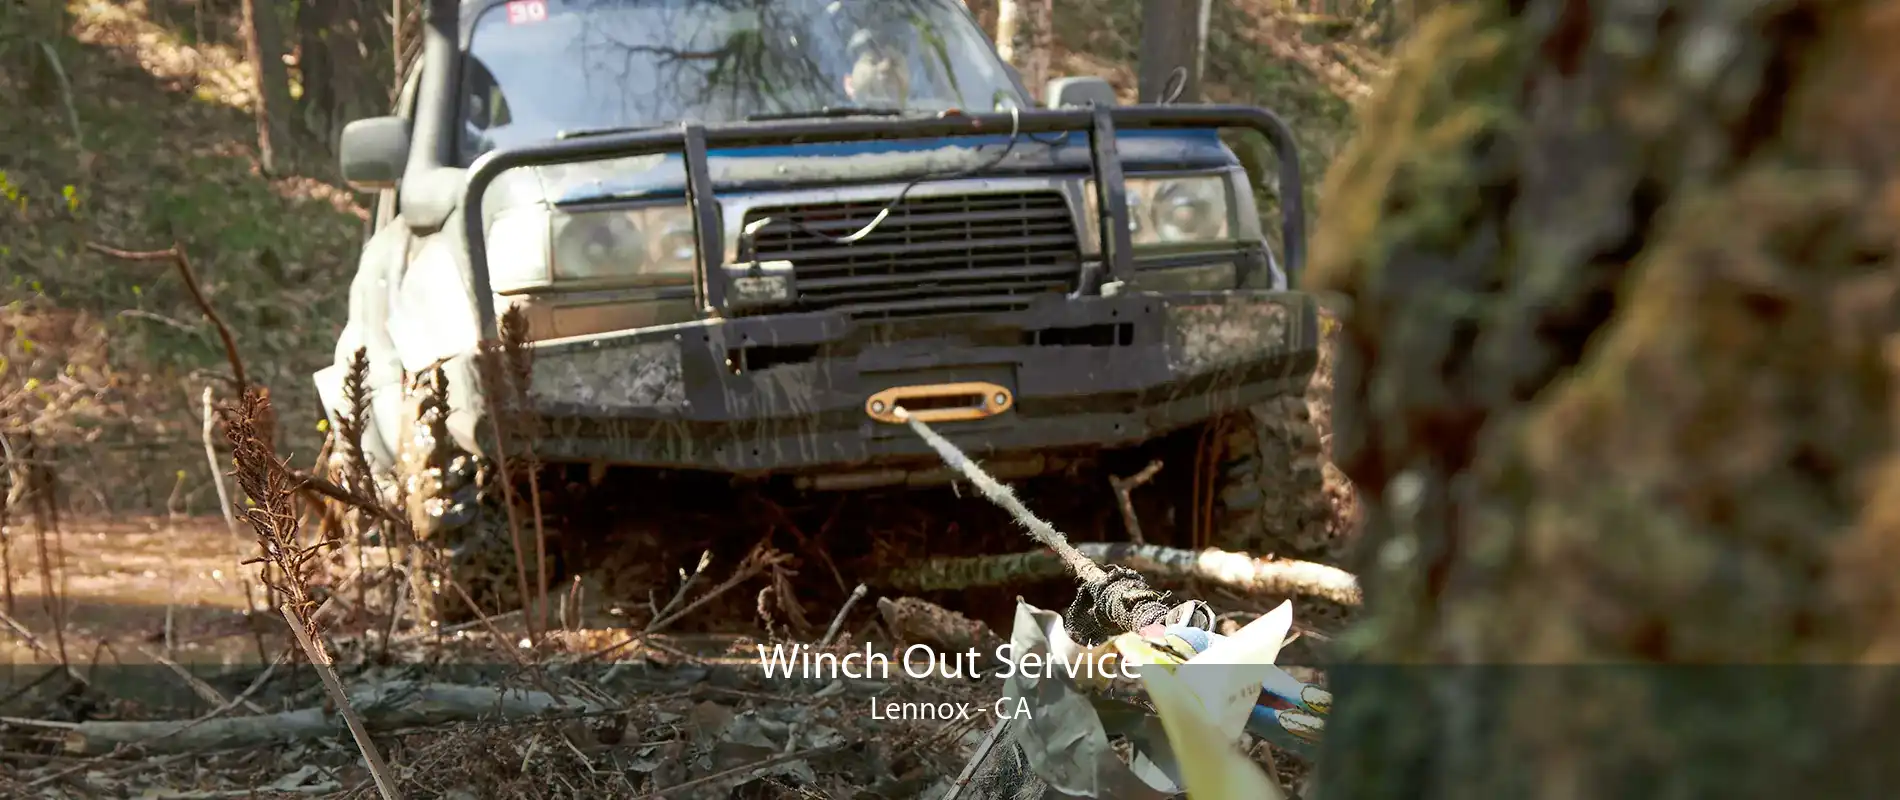 Winch Out Service Lennox - CA